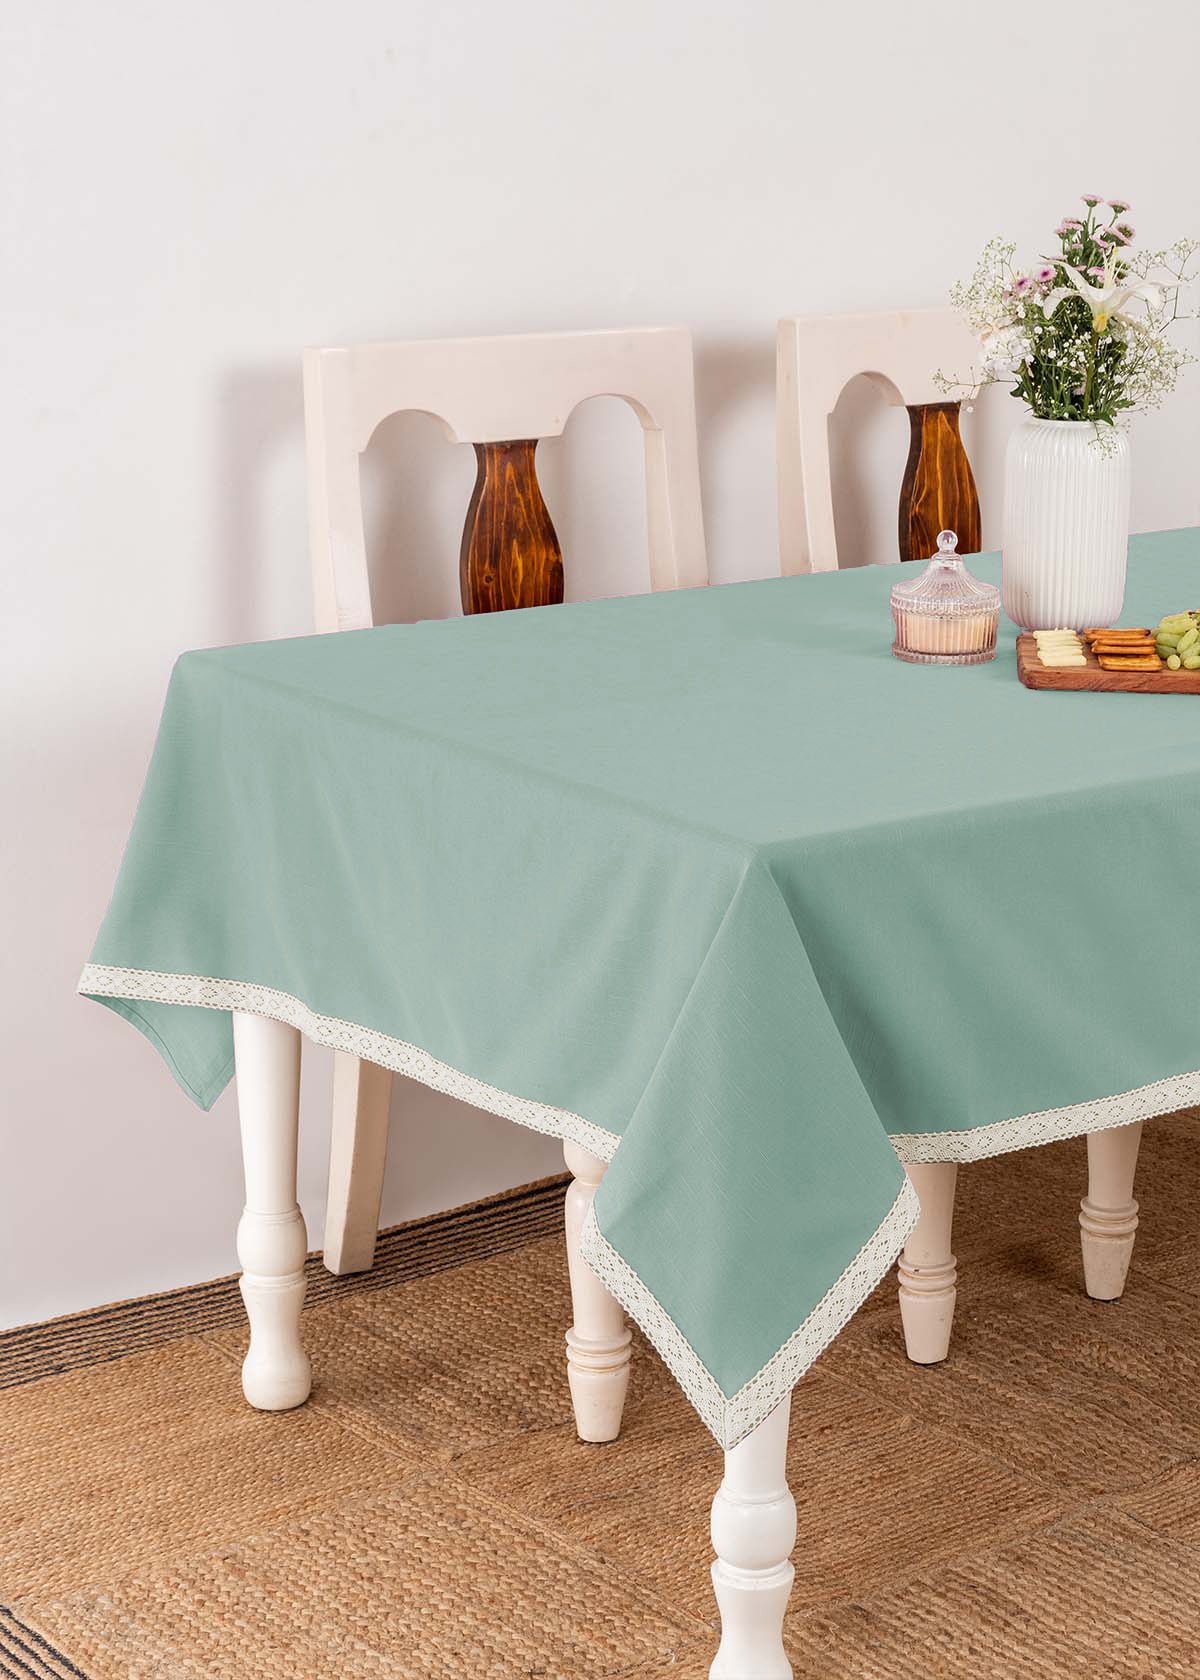 Solid Nile Blue 100% cotton plain table cloth for 4 seater or 6 seater dining with lace border